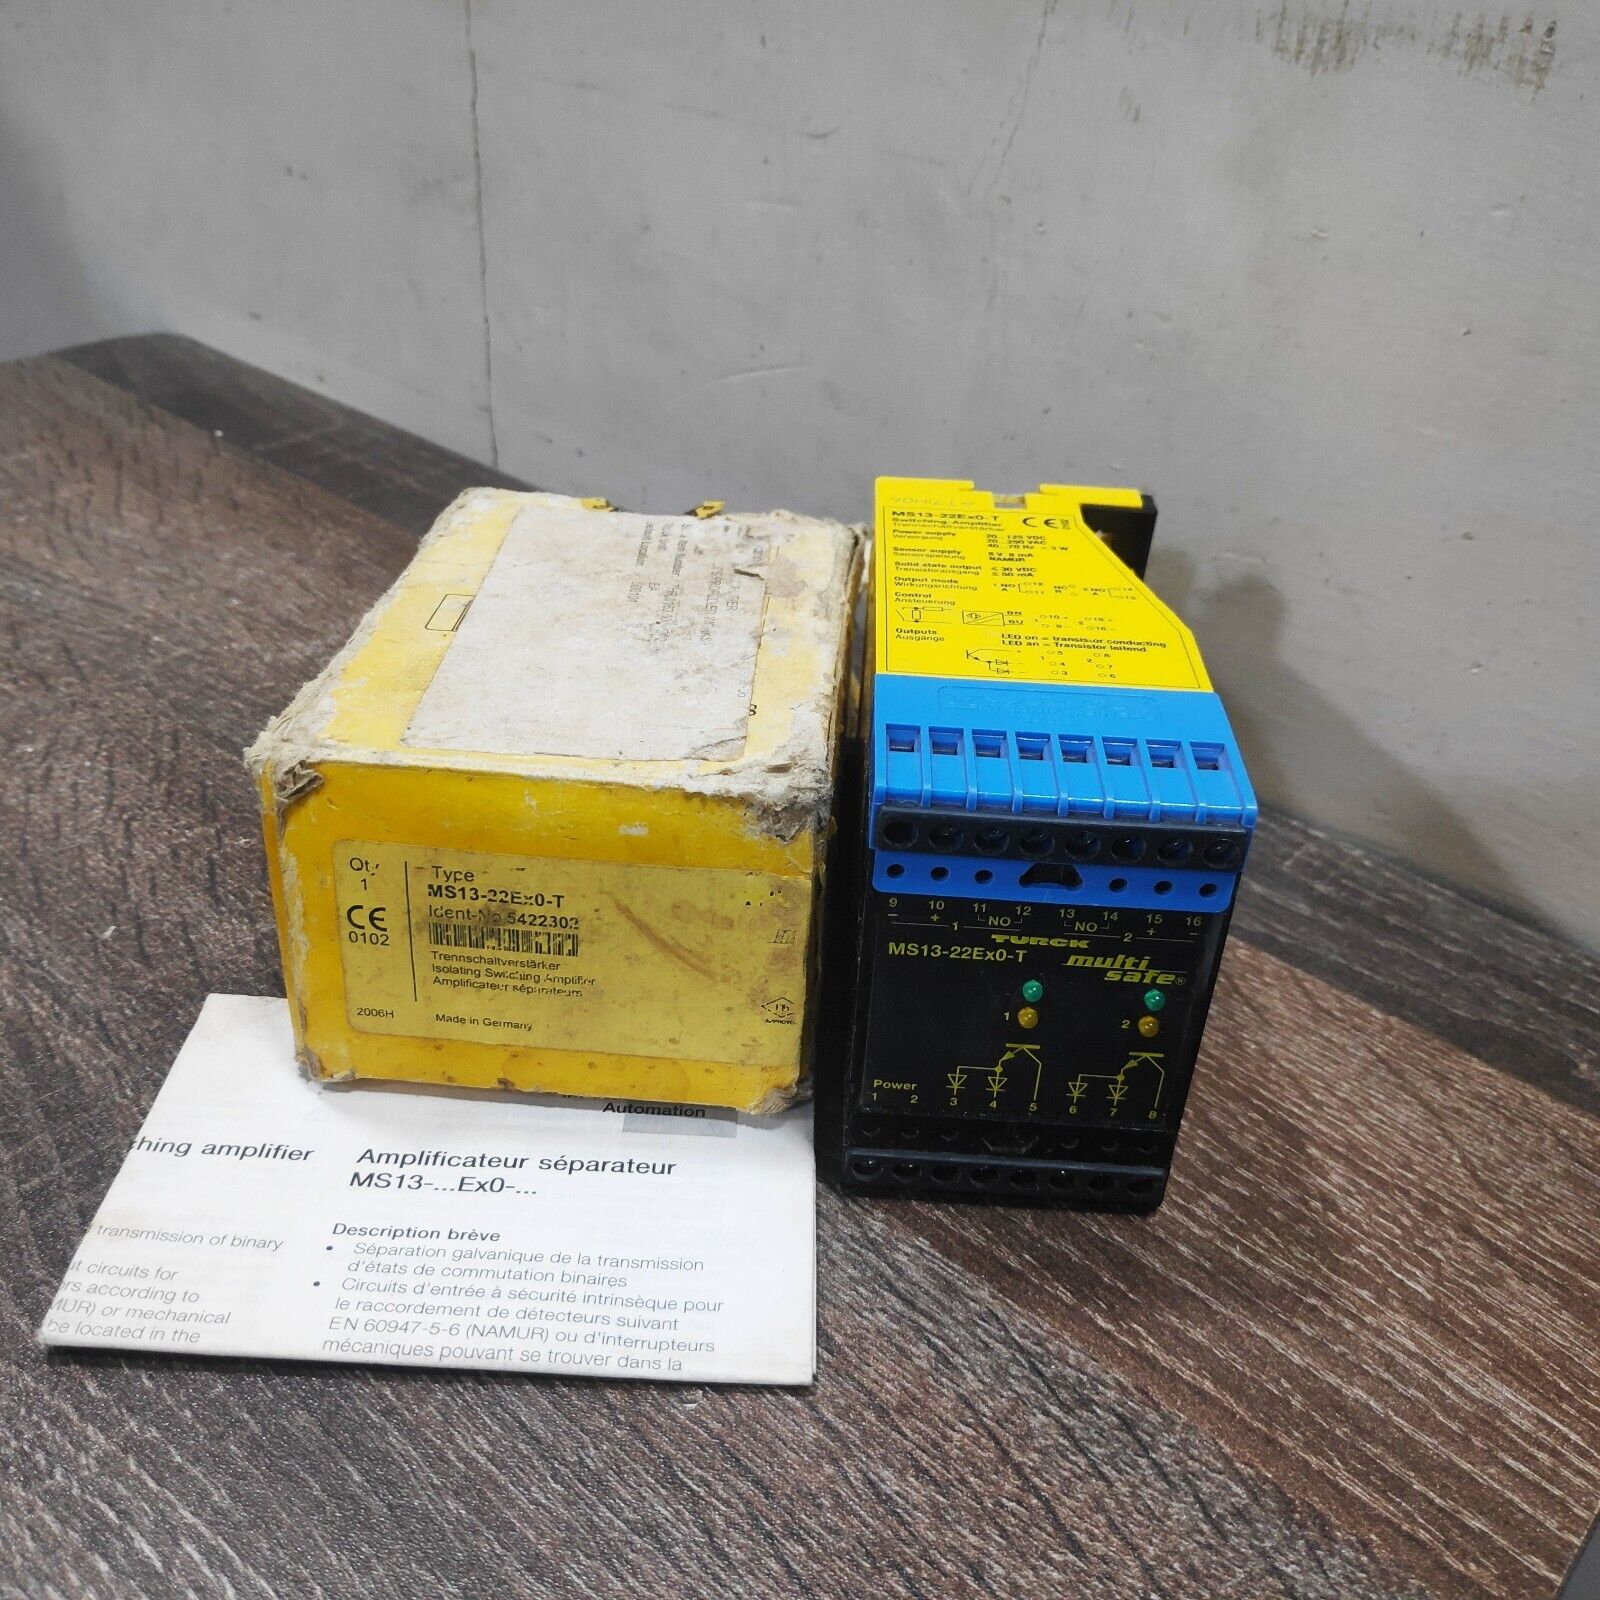 TURCK MS13-22EX0-T AMPLIFIER RELAY 90-132VAC 10-30VDC DIN 19234 8V 8MA MULTISAFE MULTIMODUL MULTICART AND MATING ACCESSORIES